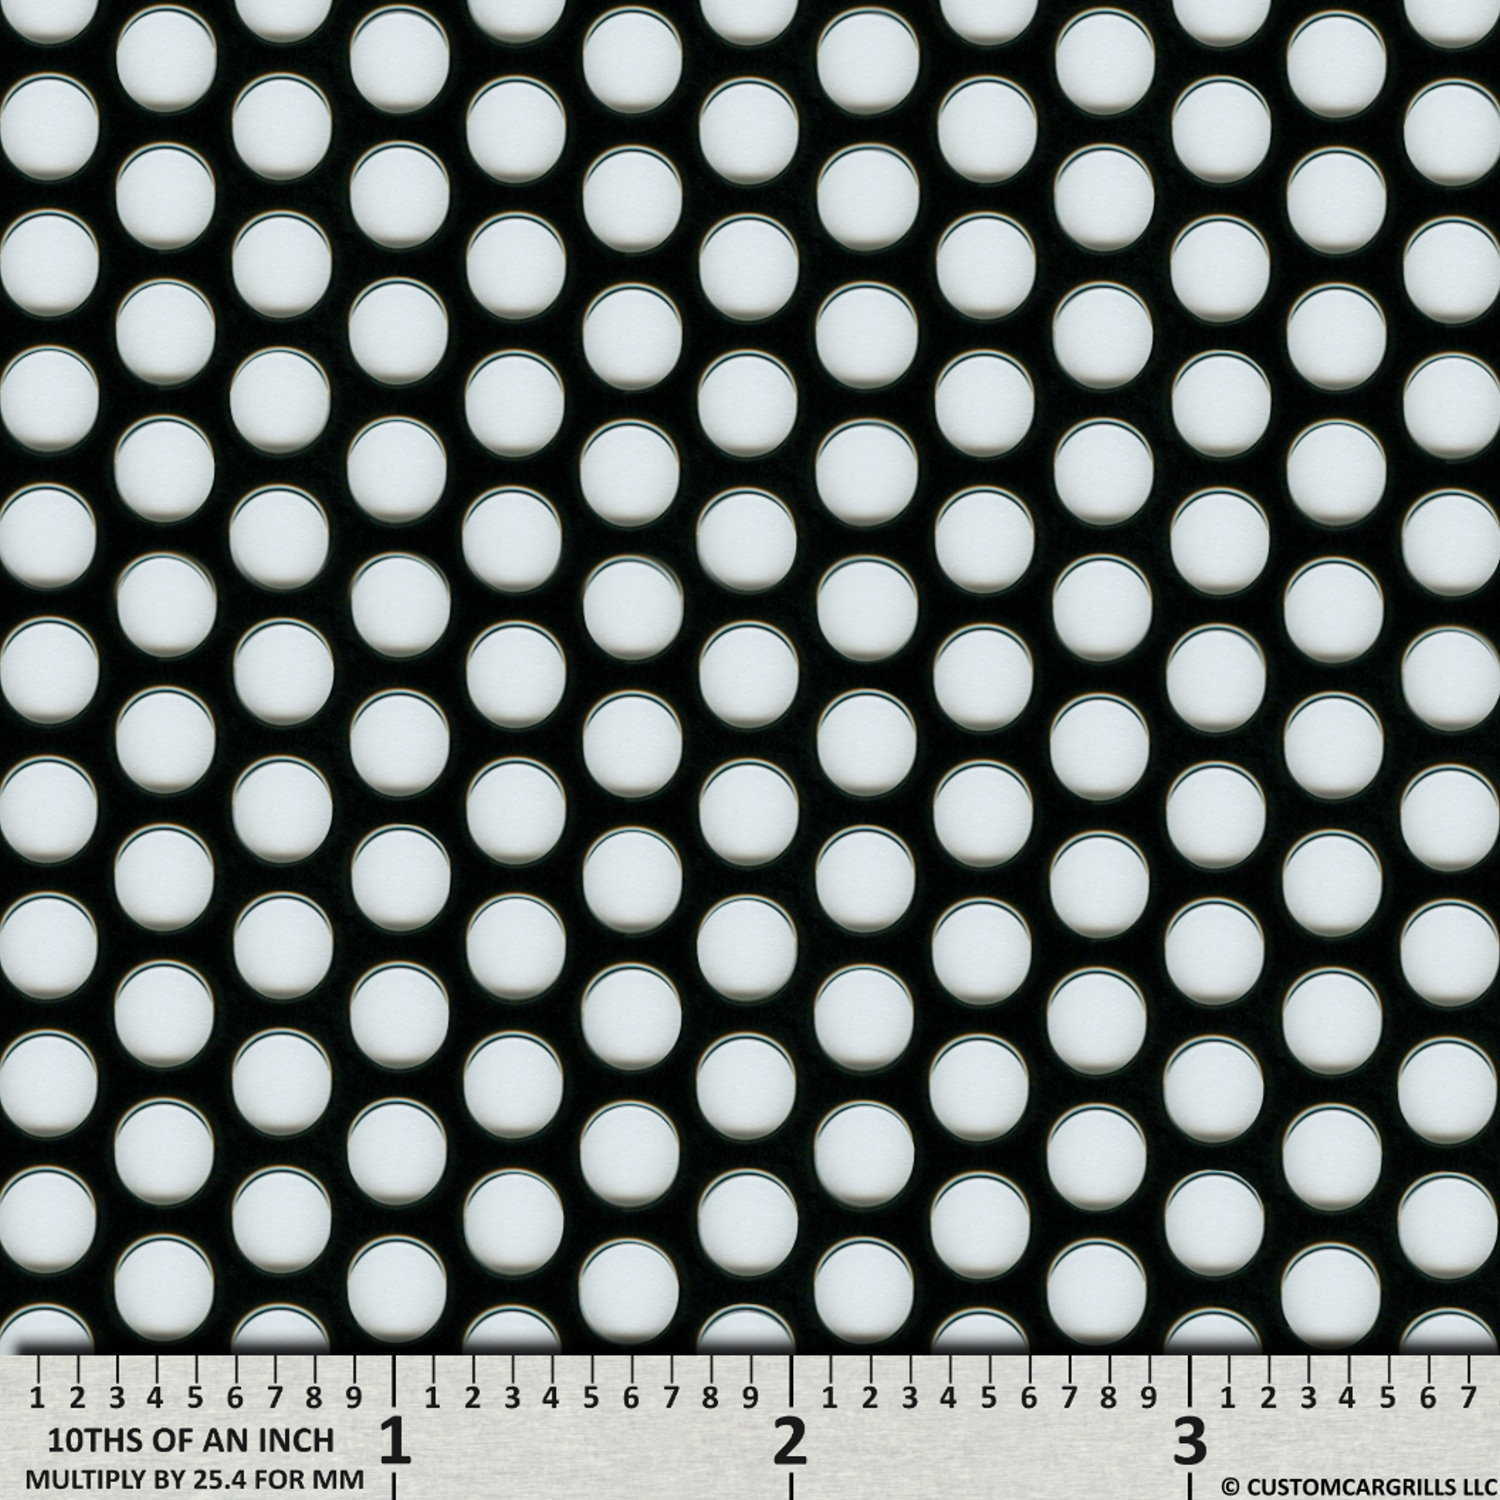 6in. x 36in. Small Perforated Grill Mesh Sheet - Gloss Black